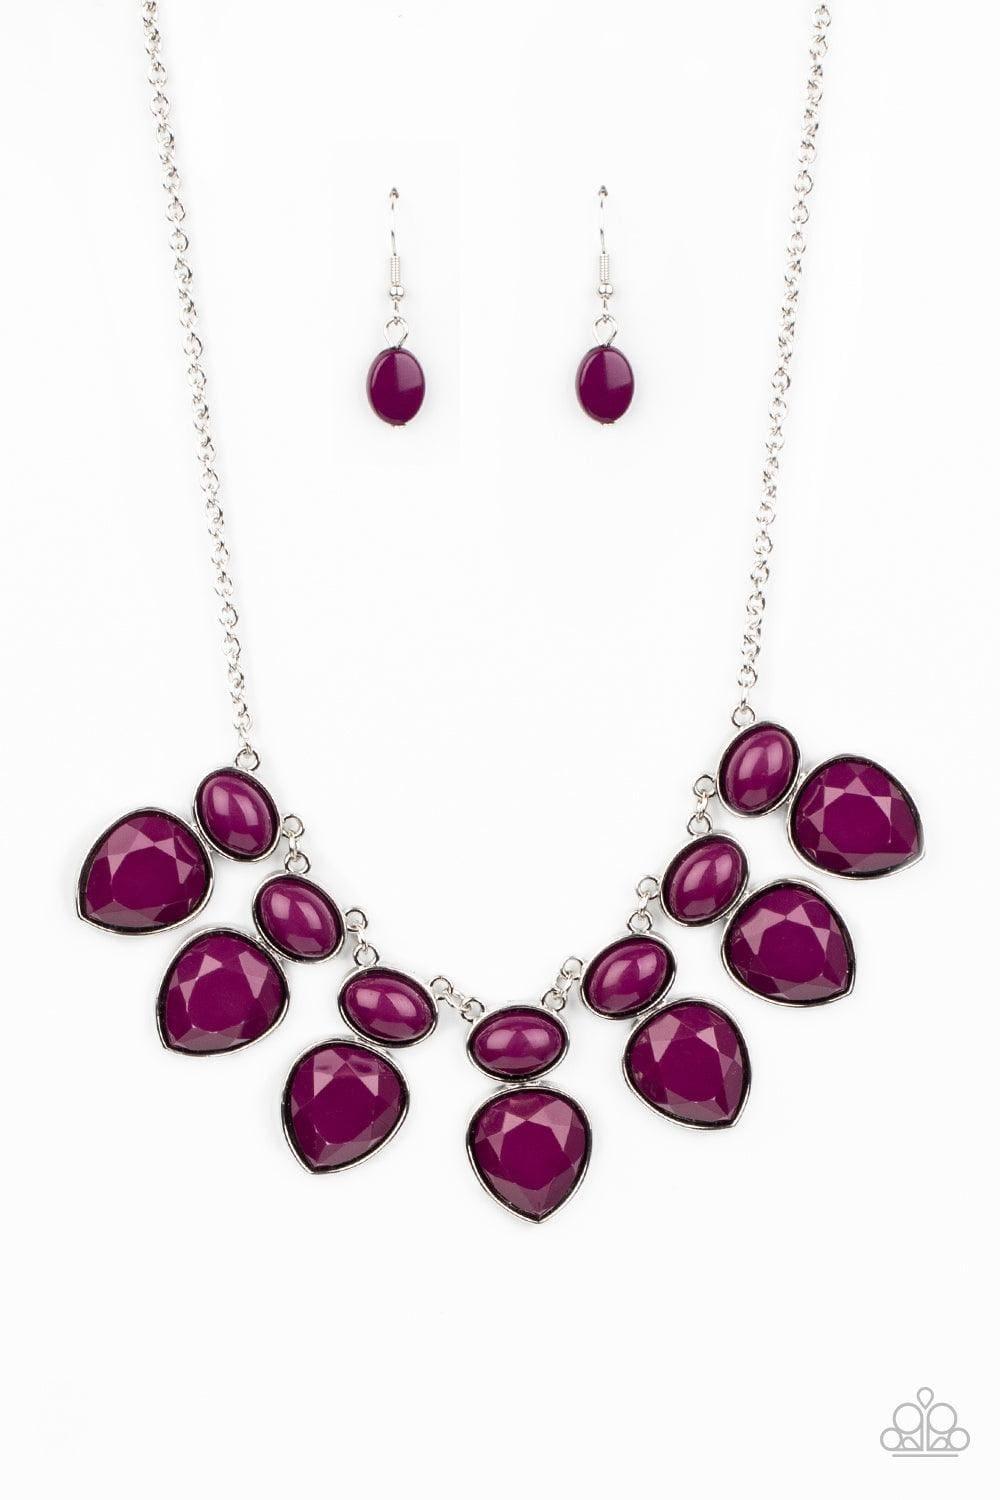 Paparazzi Accessories - Modern Masquerade - Purple Necklace - Bling by JessieK